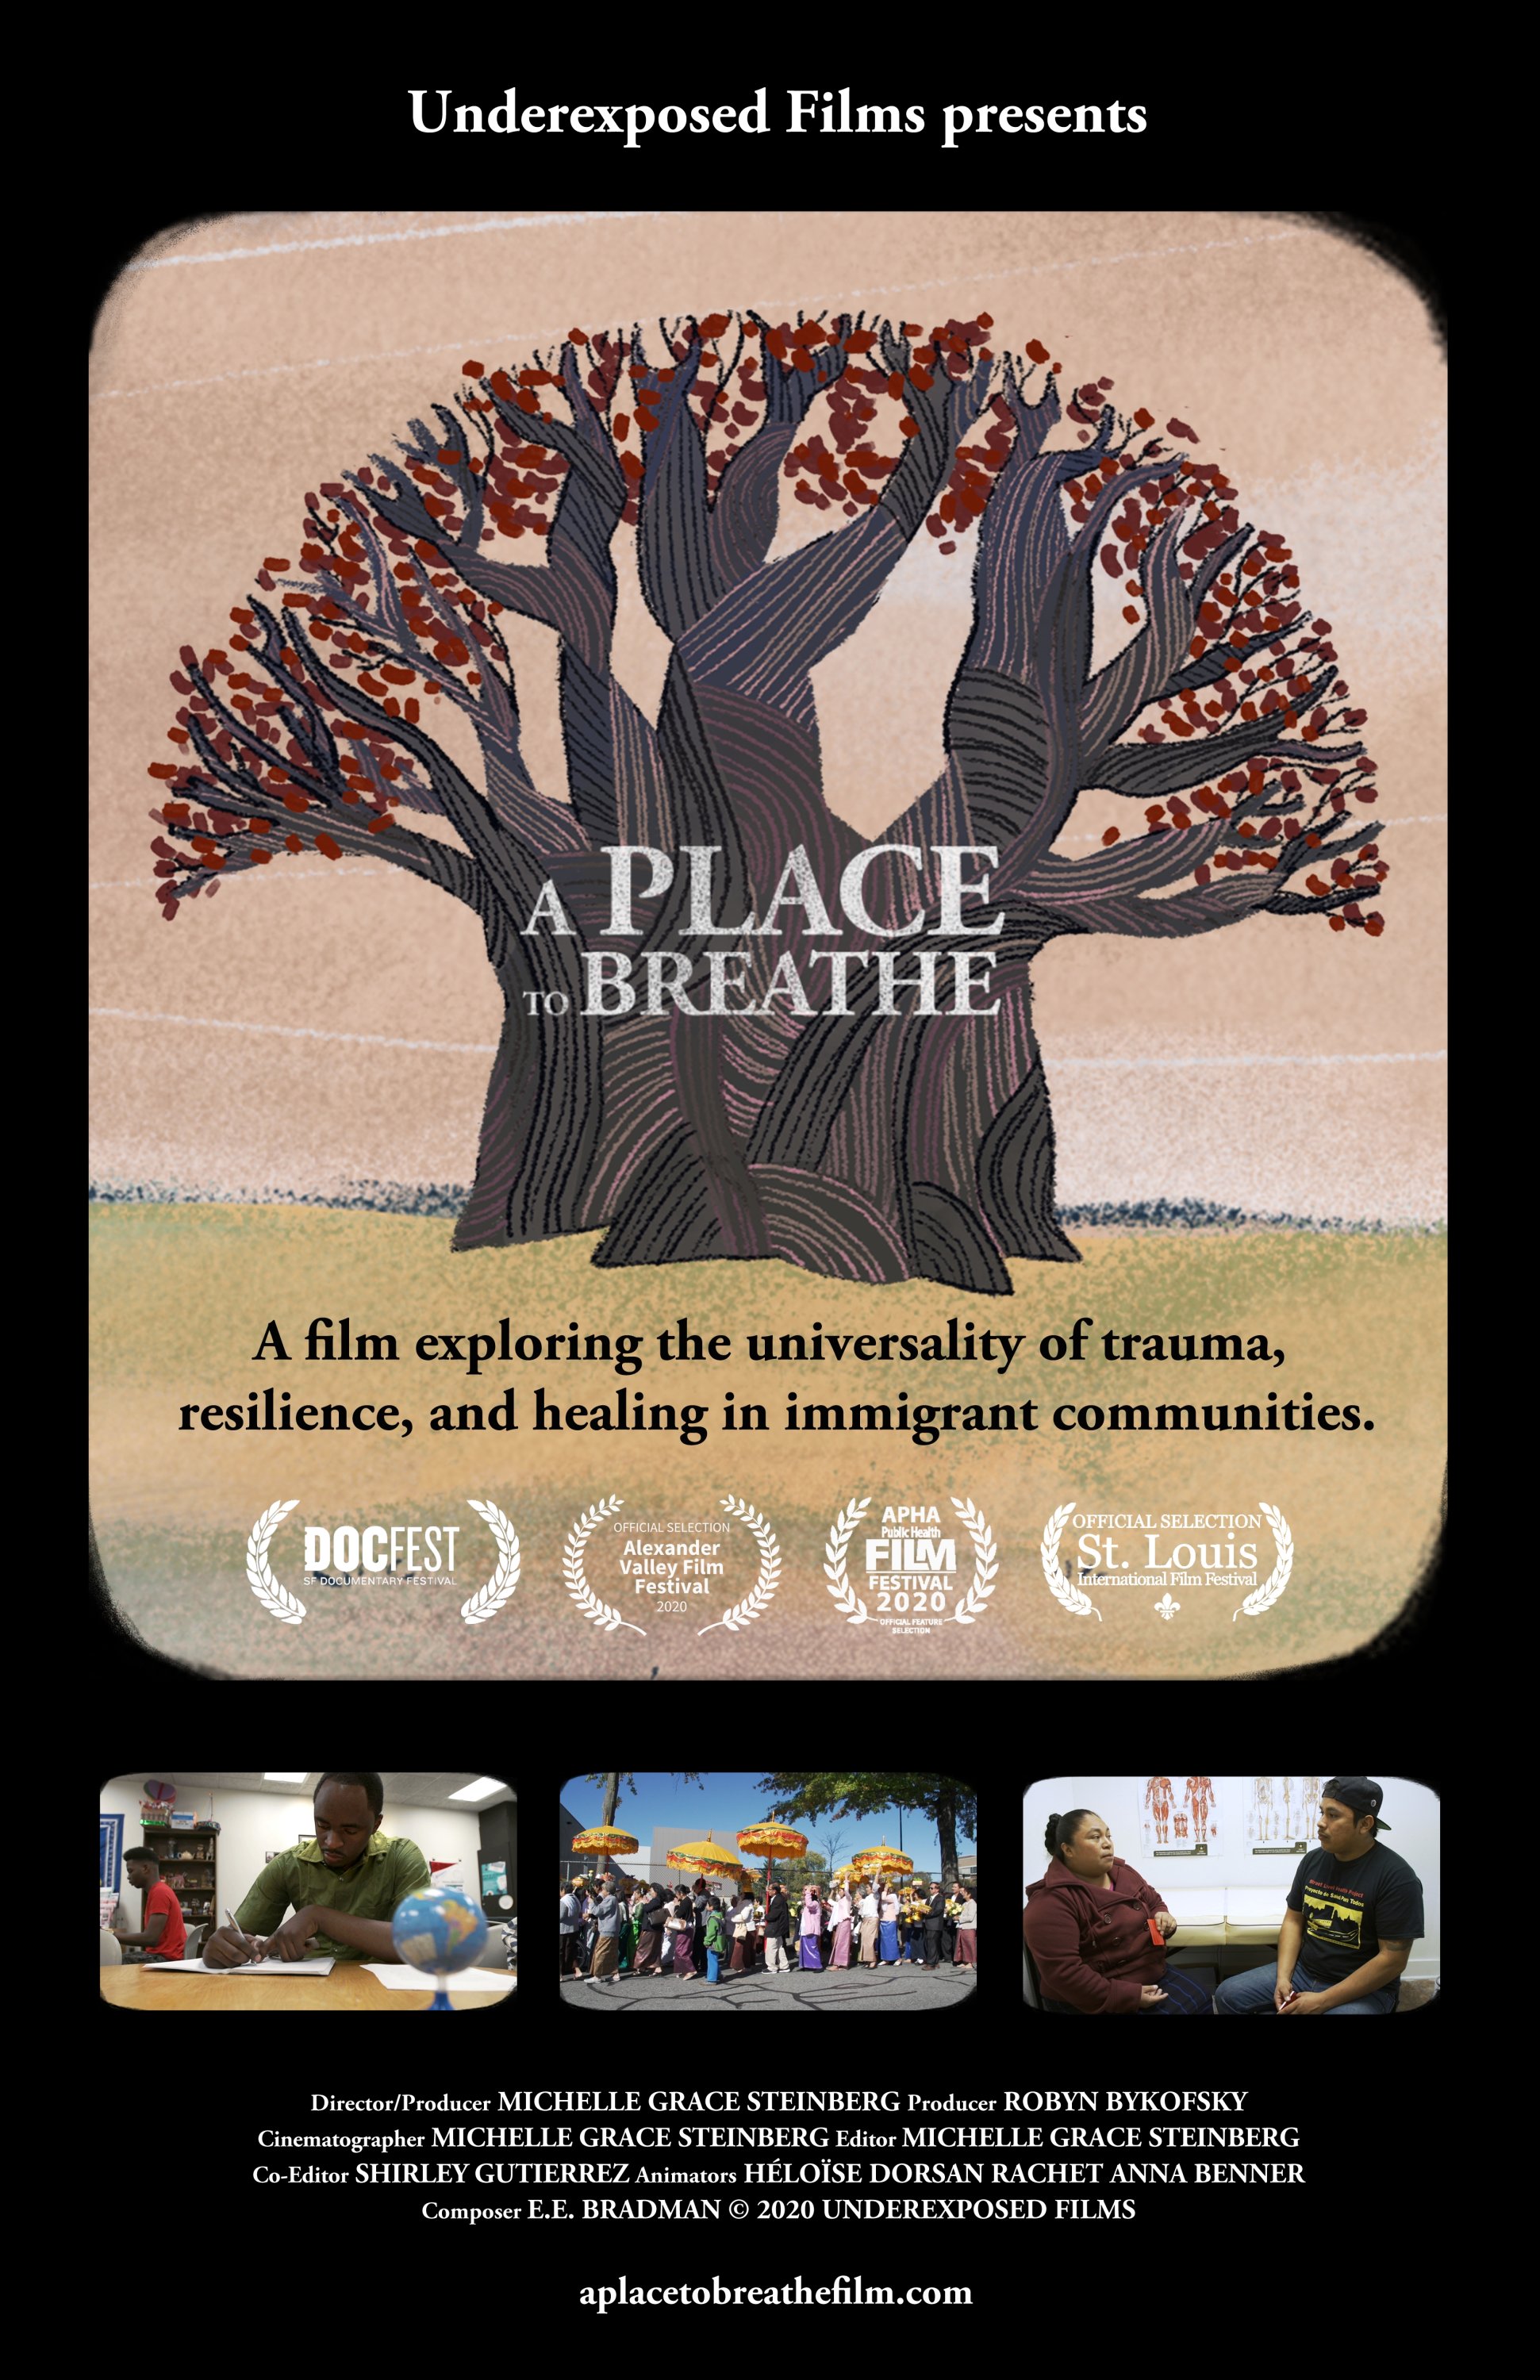 A poster of Michelle Grace Steinberg's 'A Place To Breathe.'